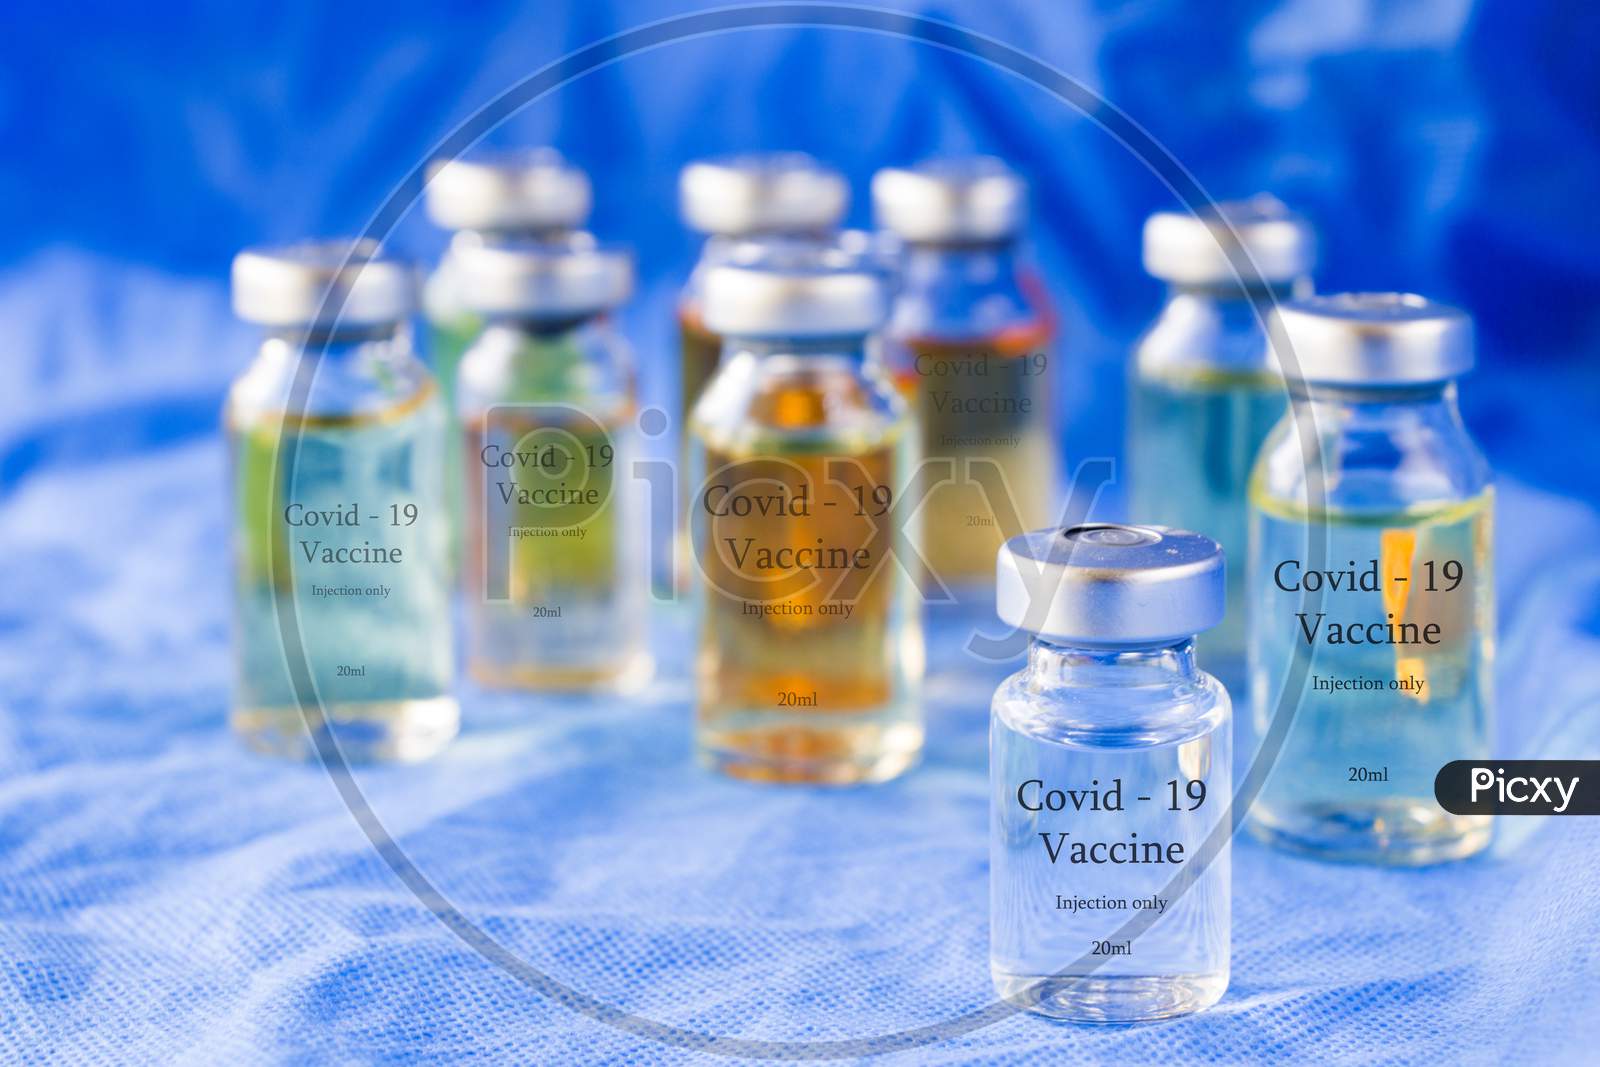 Corona Virus And Covid - 19 New Vaccine In Ampules, Different Color Variations Of Vaccine